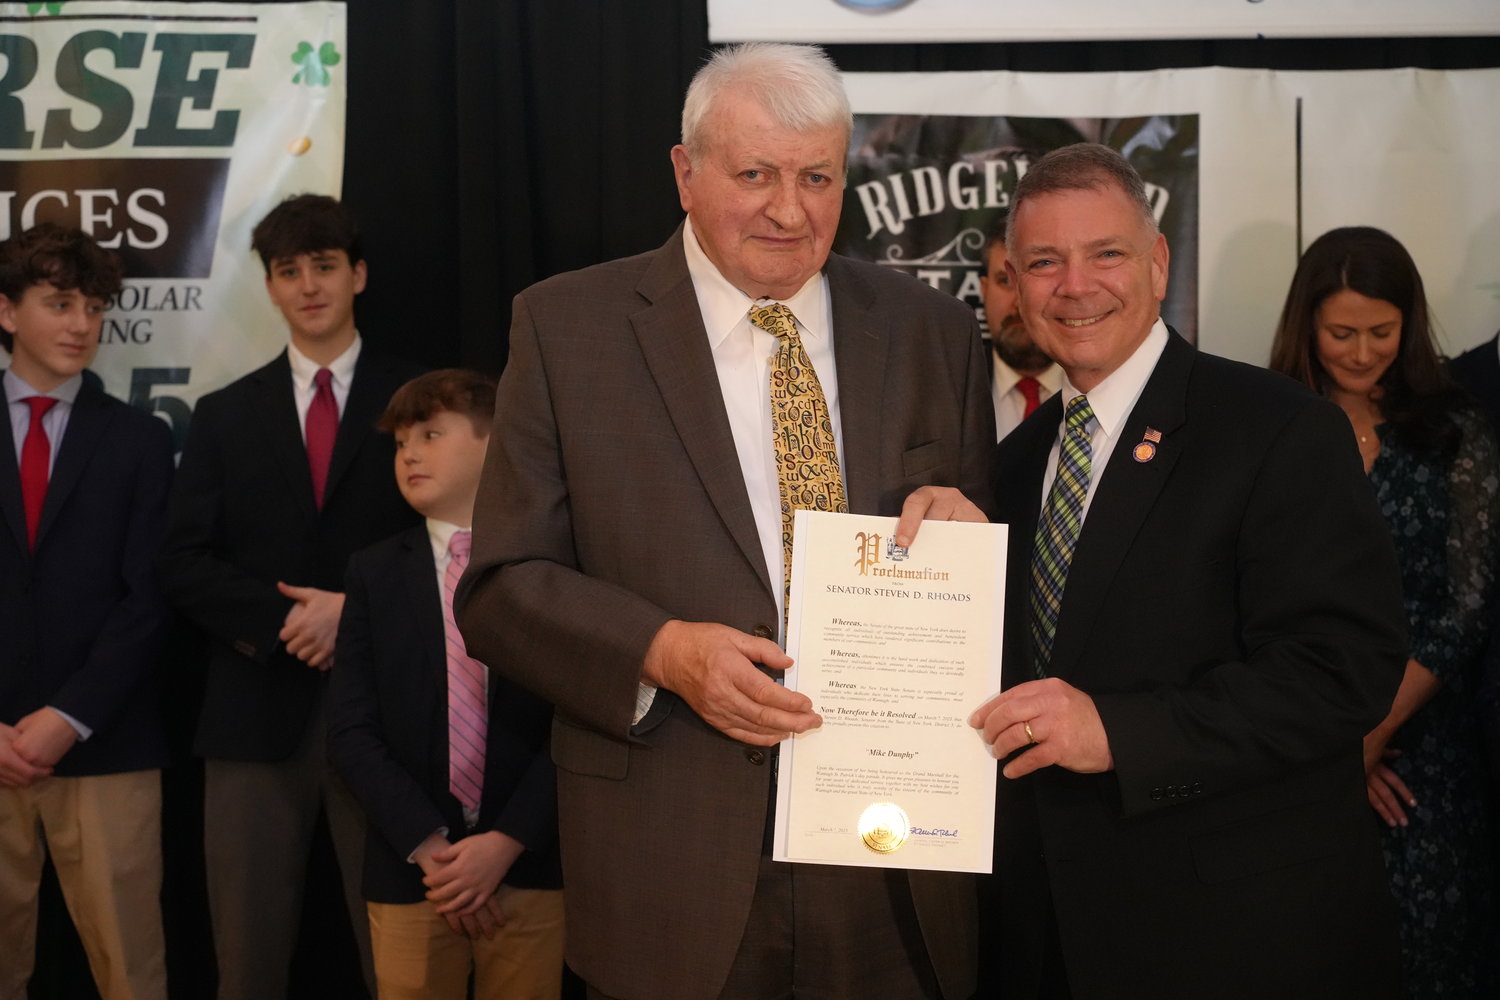 Dunphy was presented with certificates from both State Senator Steven Rhoads and Town of Hempstead Councilman Christopher Carini in recognition of his years of service to Wantagh.